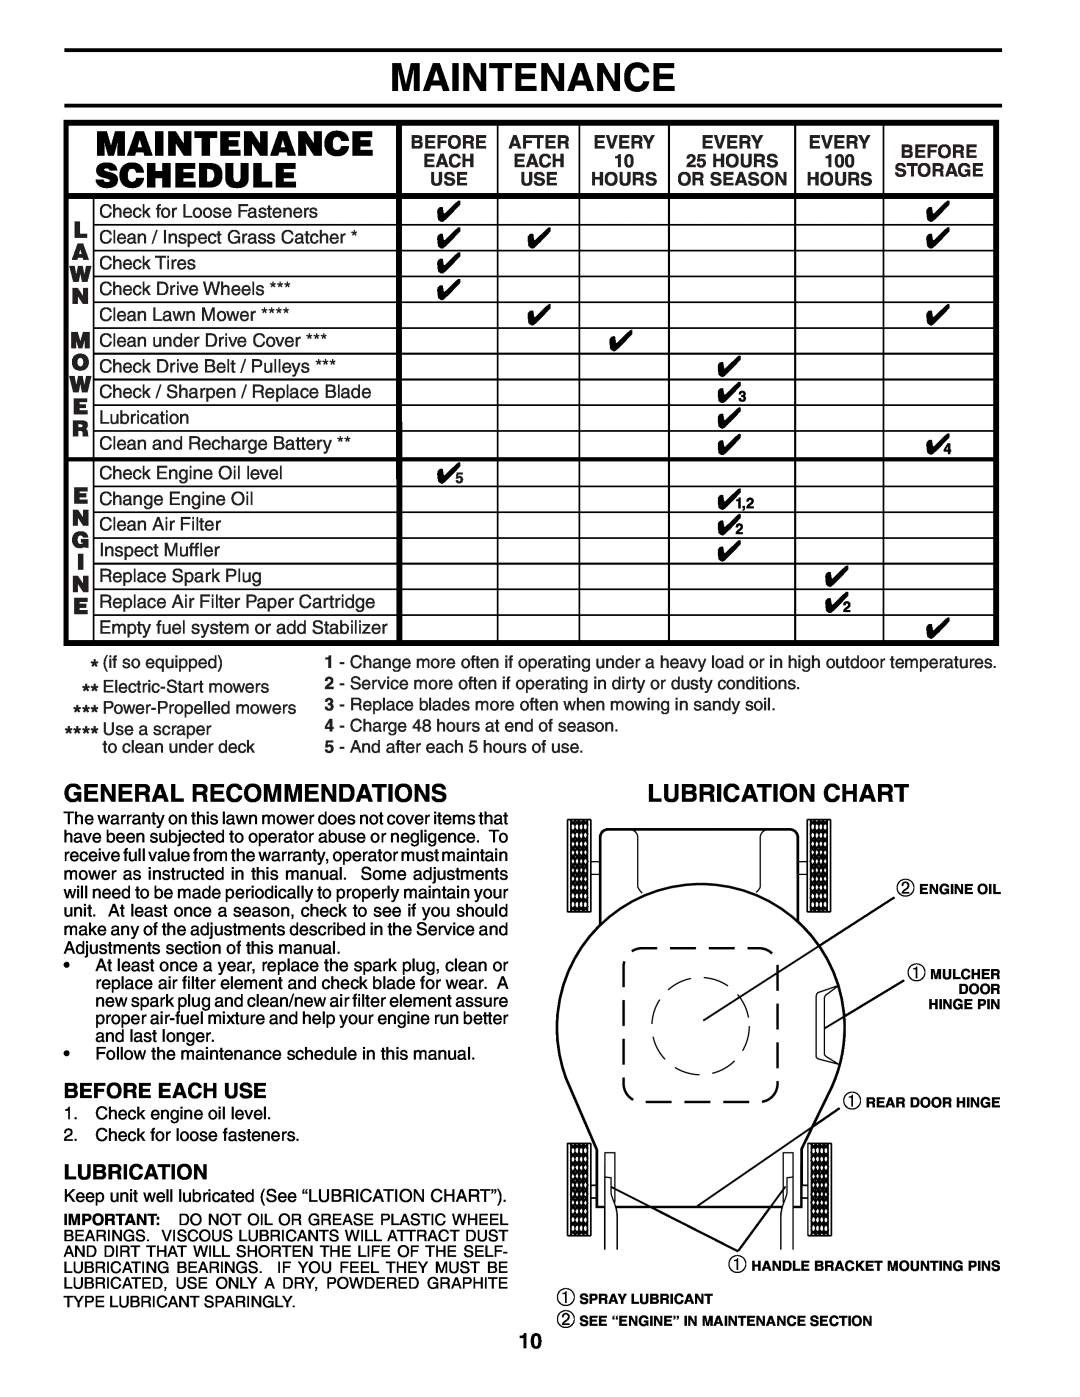 Husqvarna 5521BBC Maintenance, General Recommendations, Lubrication Chart, Before Each Use, After, Every, Hours, Storage 